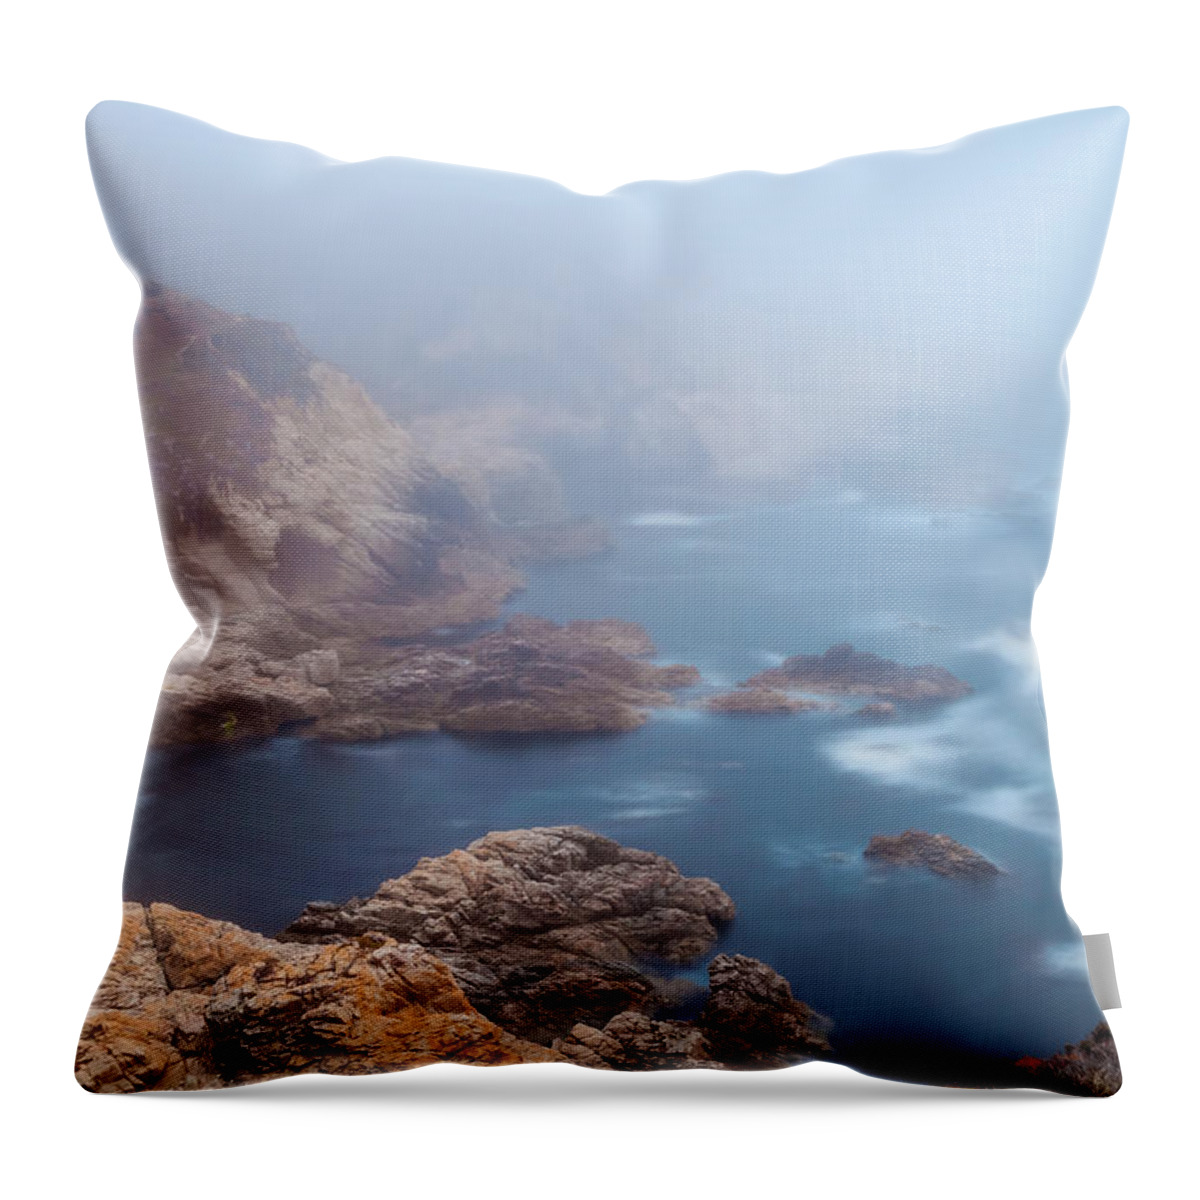 American Landscapes Throw Pillow featuring the photograph The Summer Fog by Jonathan Nguyen